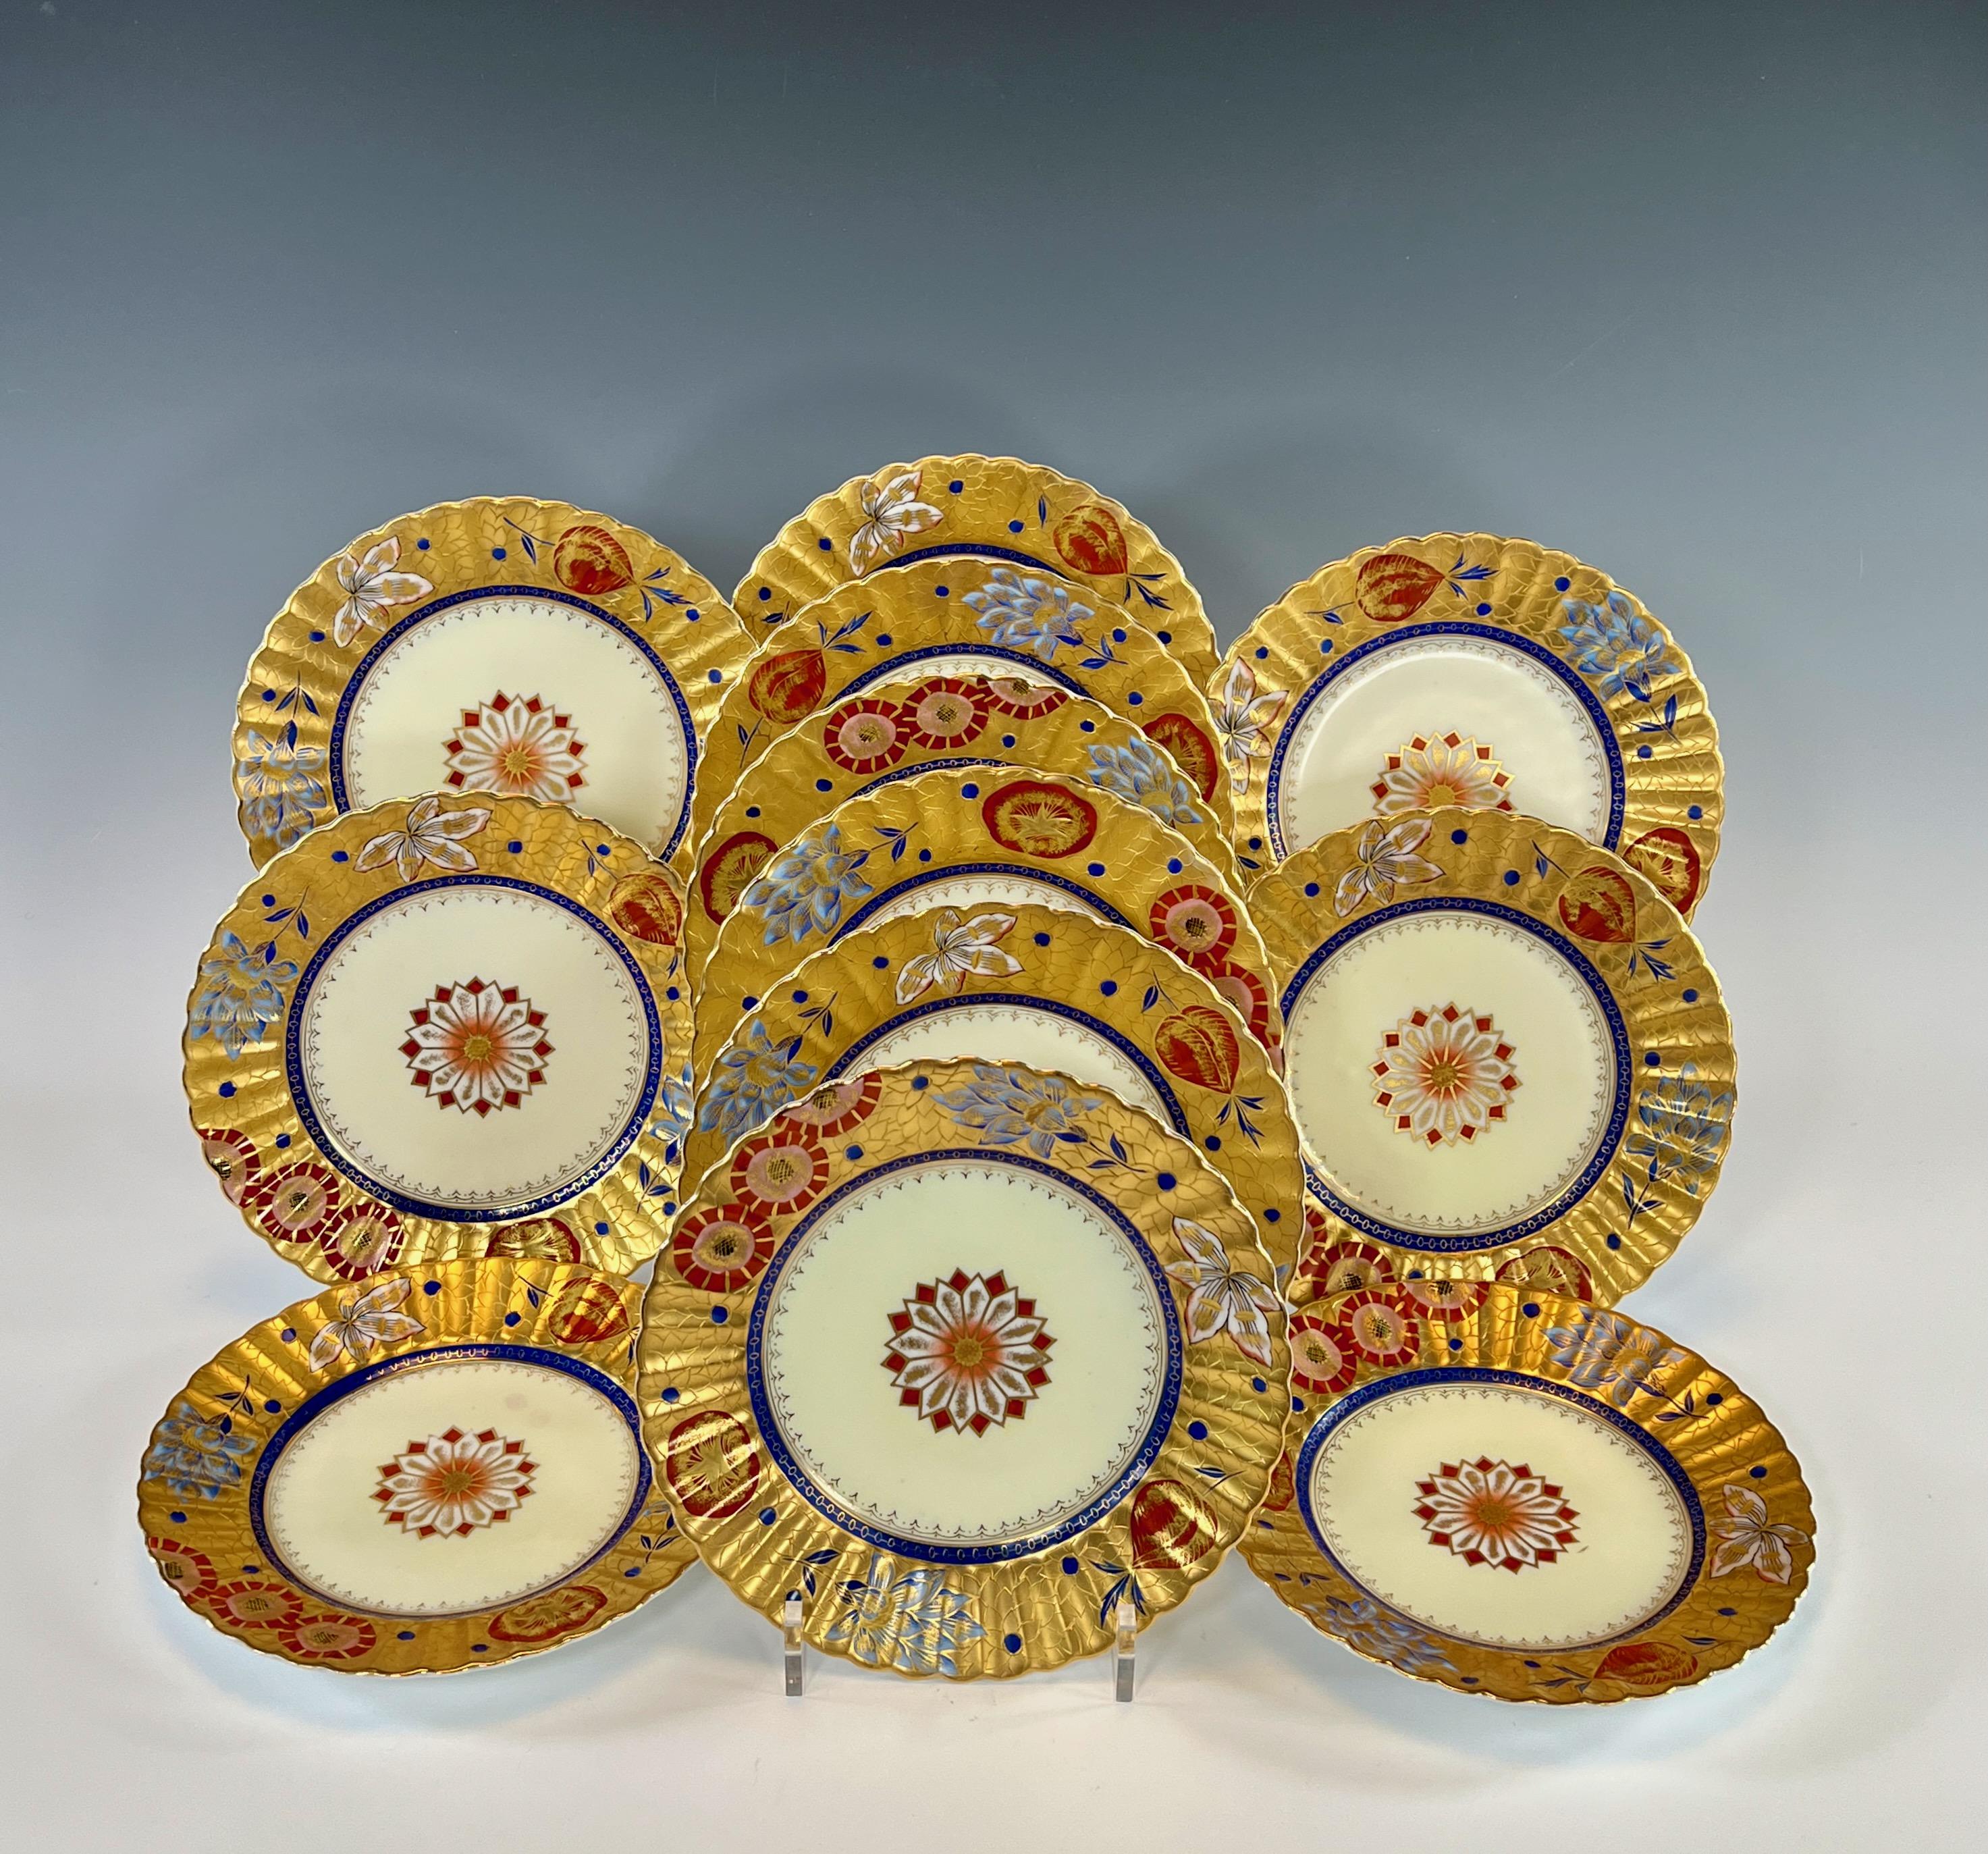 This exceptional 13 piece service exhibits all of the artistic elements of the Aesthetic Movement. Both the fan shaped borders and sizes are unusual and the decoration is both exotic and evocative of the popular Asian influence of the period. The